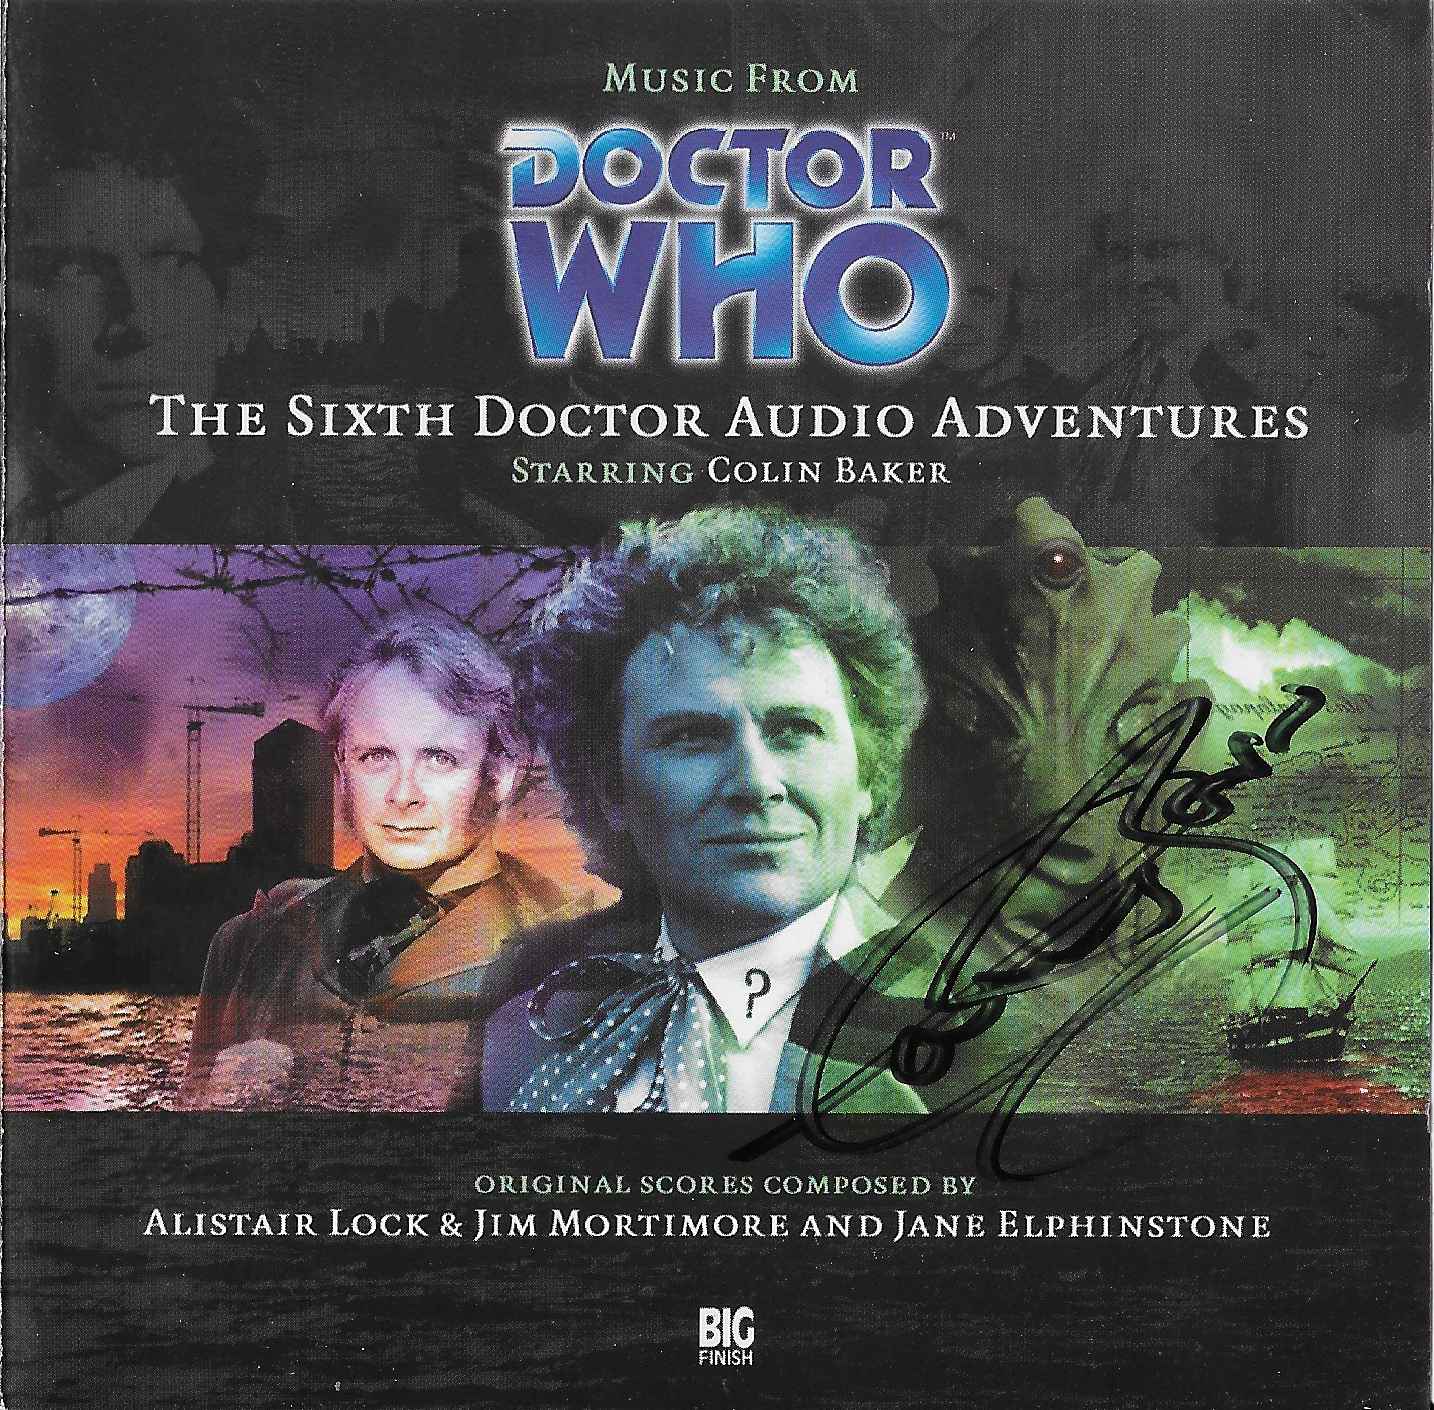 Picture of ISBN 1-84435-000-2 Doctor Who - The sixth Doctor audio adventures by artist Alistair Lock / Jim Mortimore / Jane Elphinstone from the BBC records and Tapes library